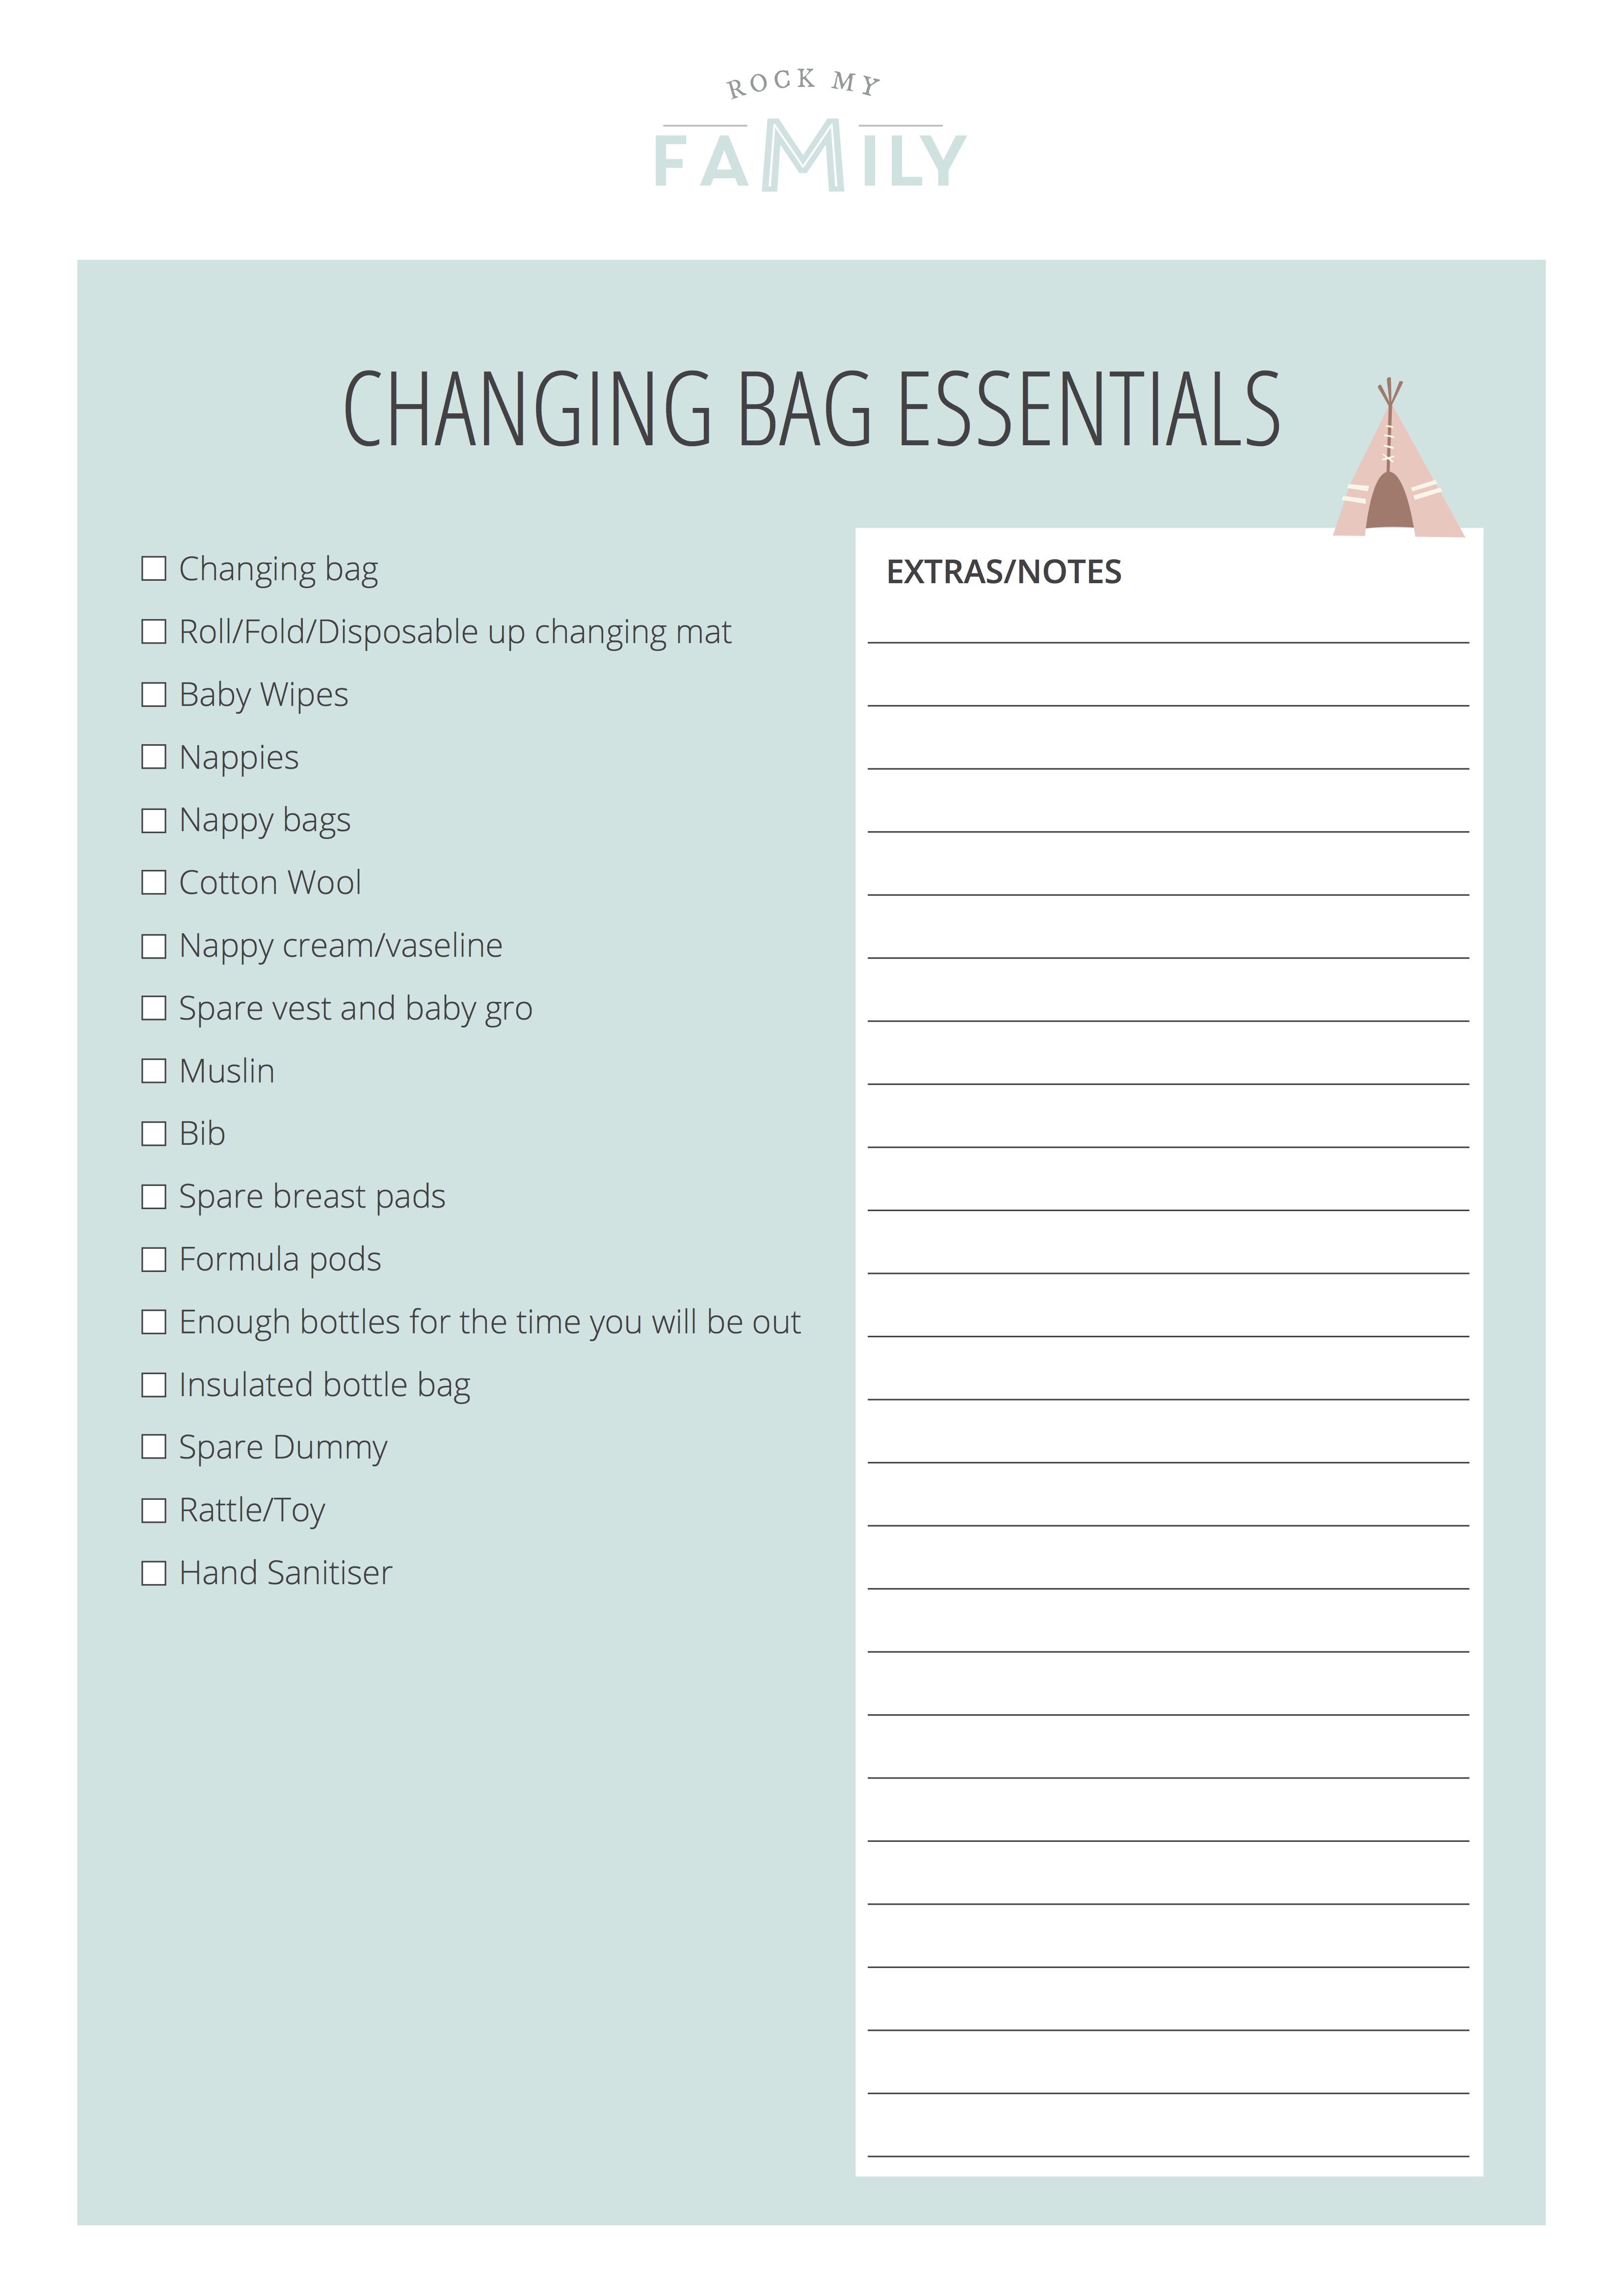 Changing Bag Essentials - Rock My Family blog | UK baby ...